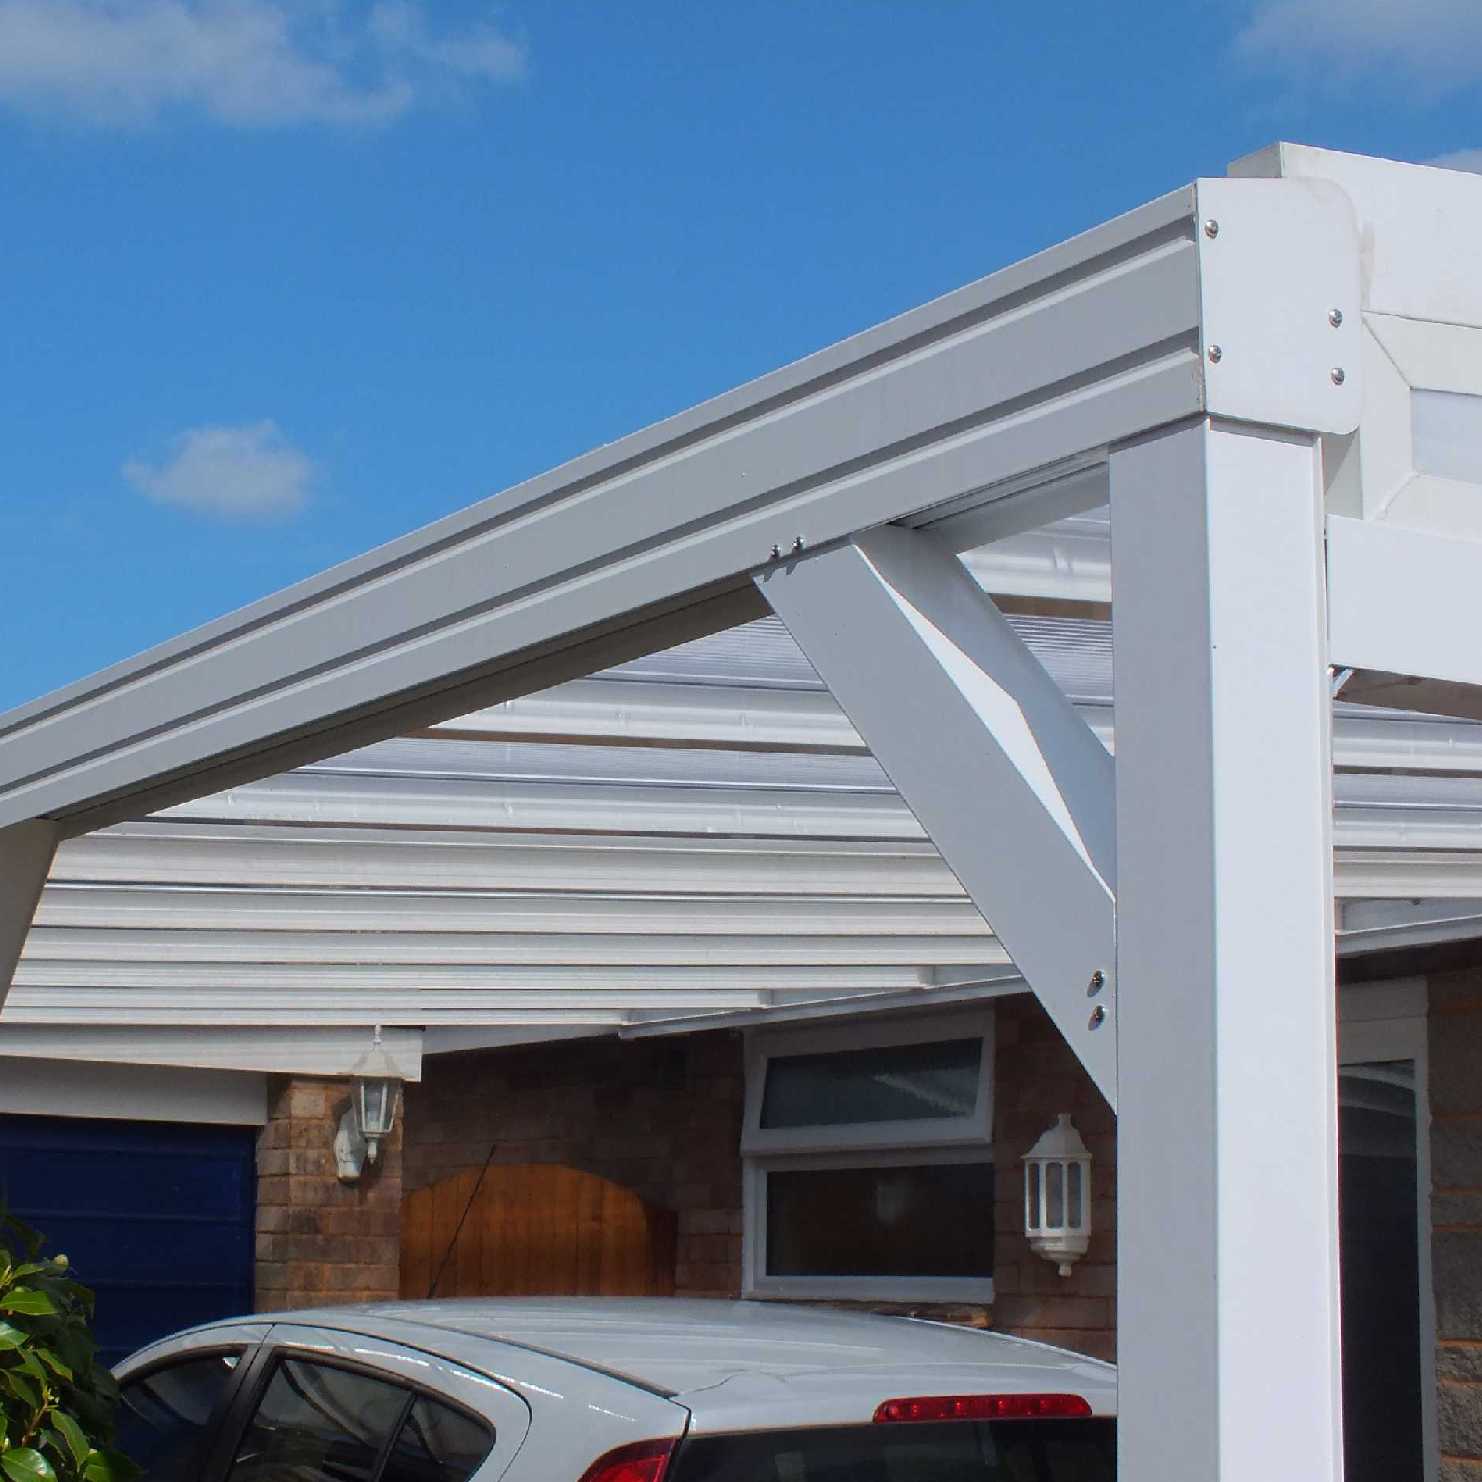 Great deals on Omega Smart Lean-To Canopy, White with 16mm Polycarbonate Glazing - 9.2m (W) x 3.5m (P), (5) Supporting Posts